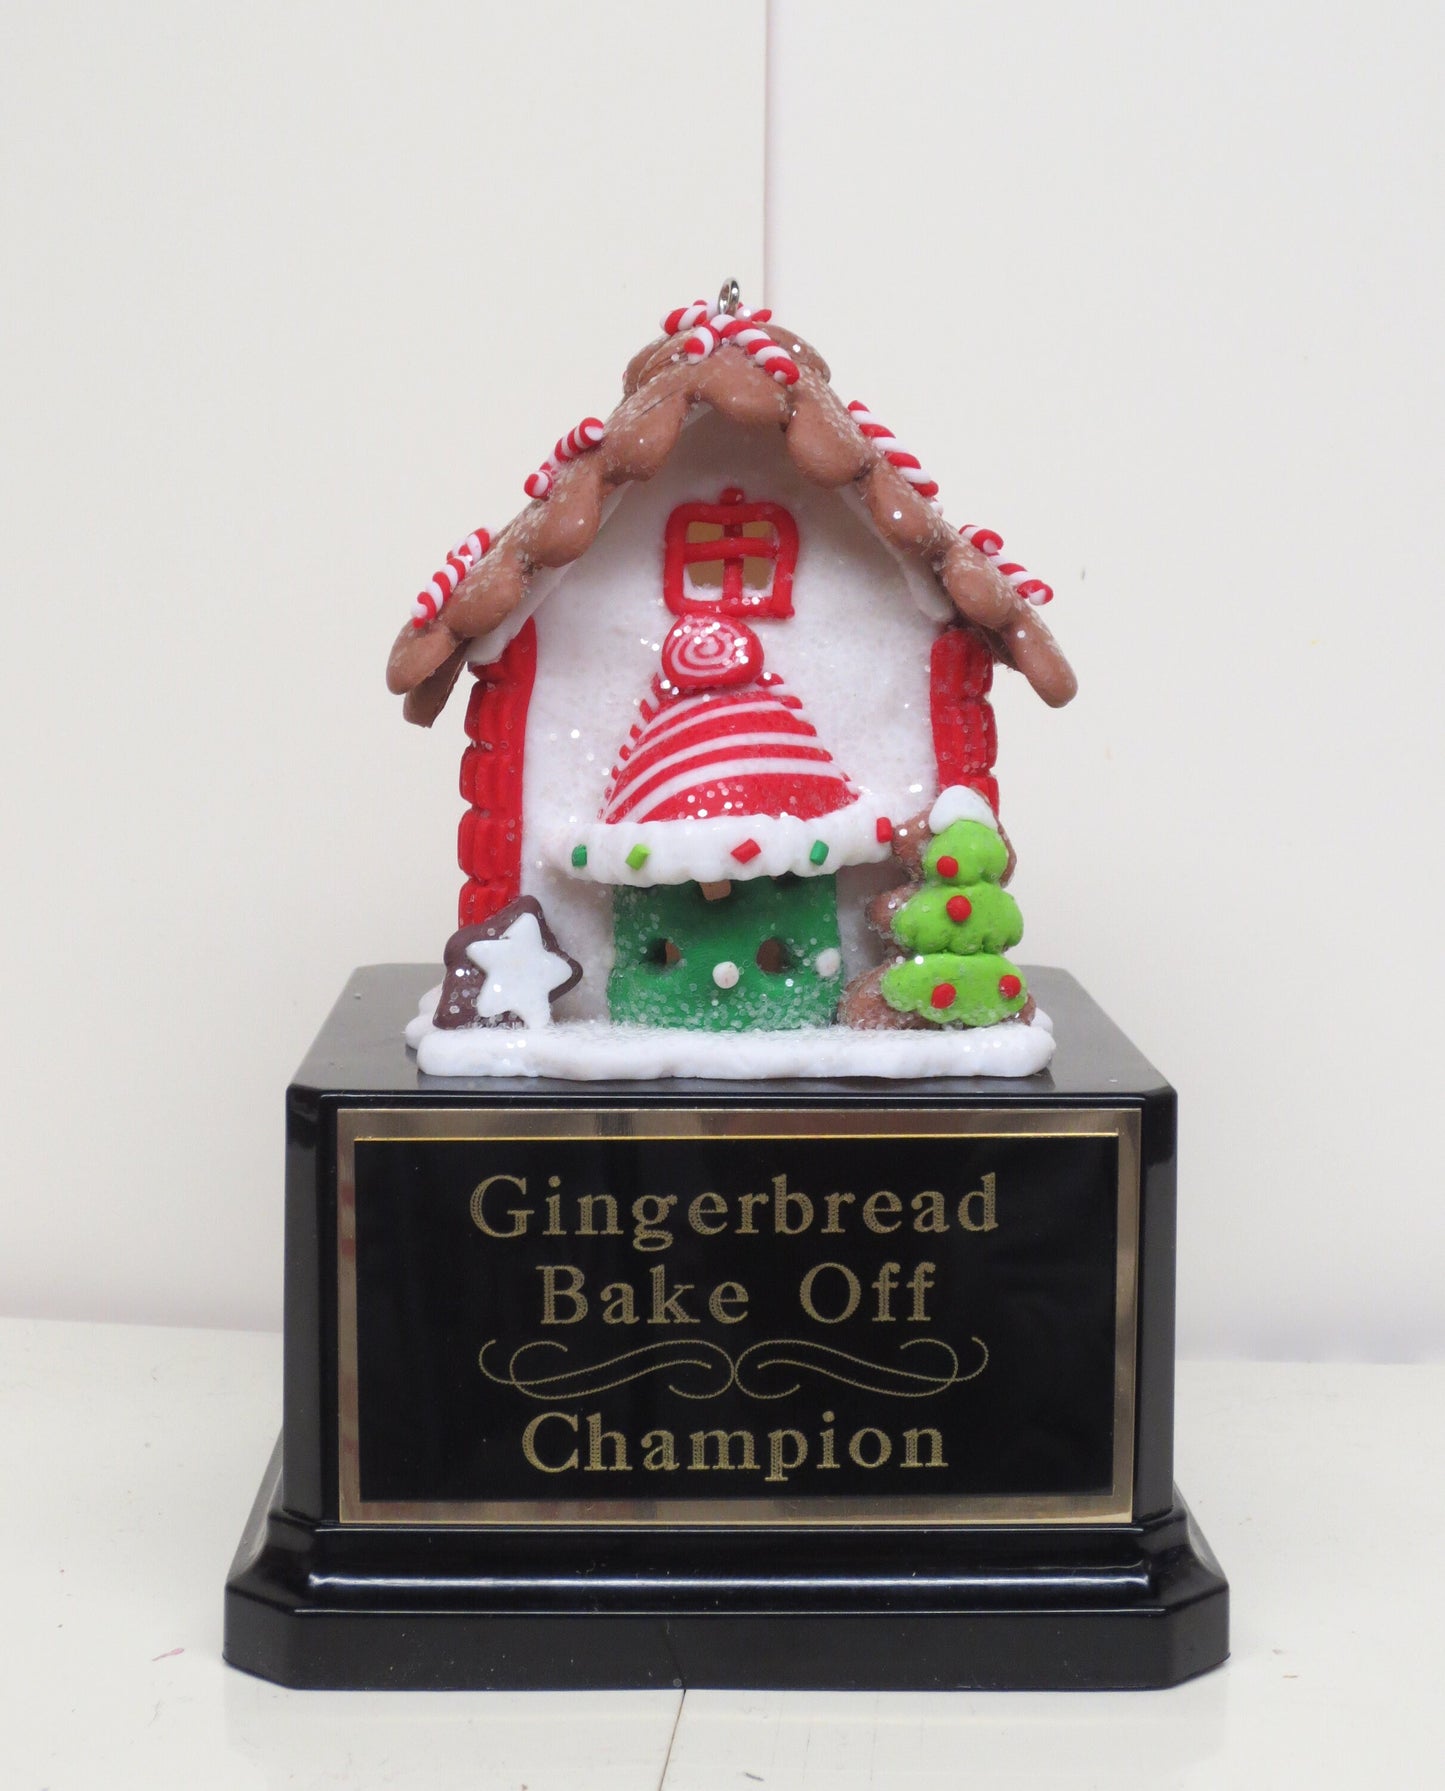 Ugly Sweater Trophy Contest Award Winner Christmas Holiday Party Cookie Gingerbread House Cookie Bake Off Trophy Christmas Decor